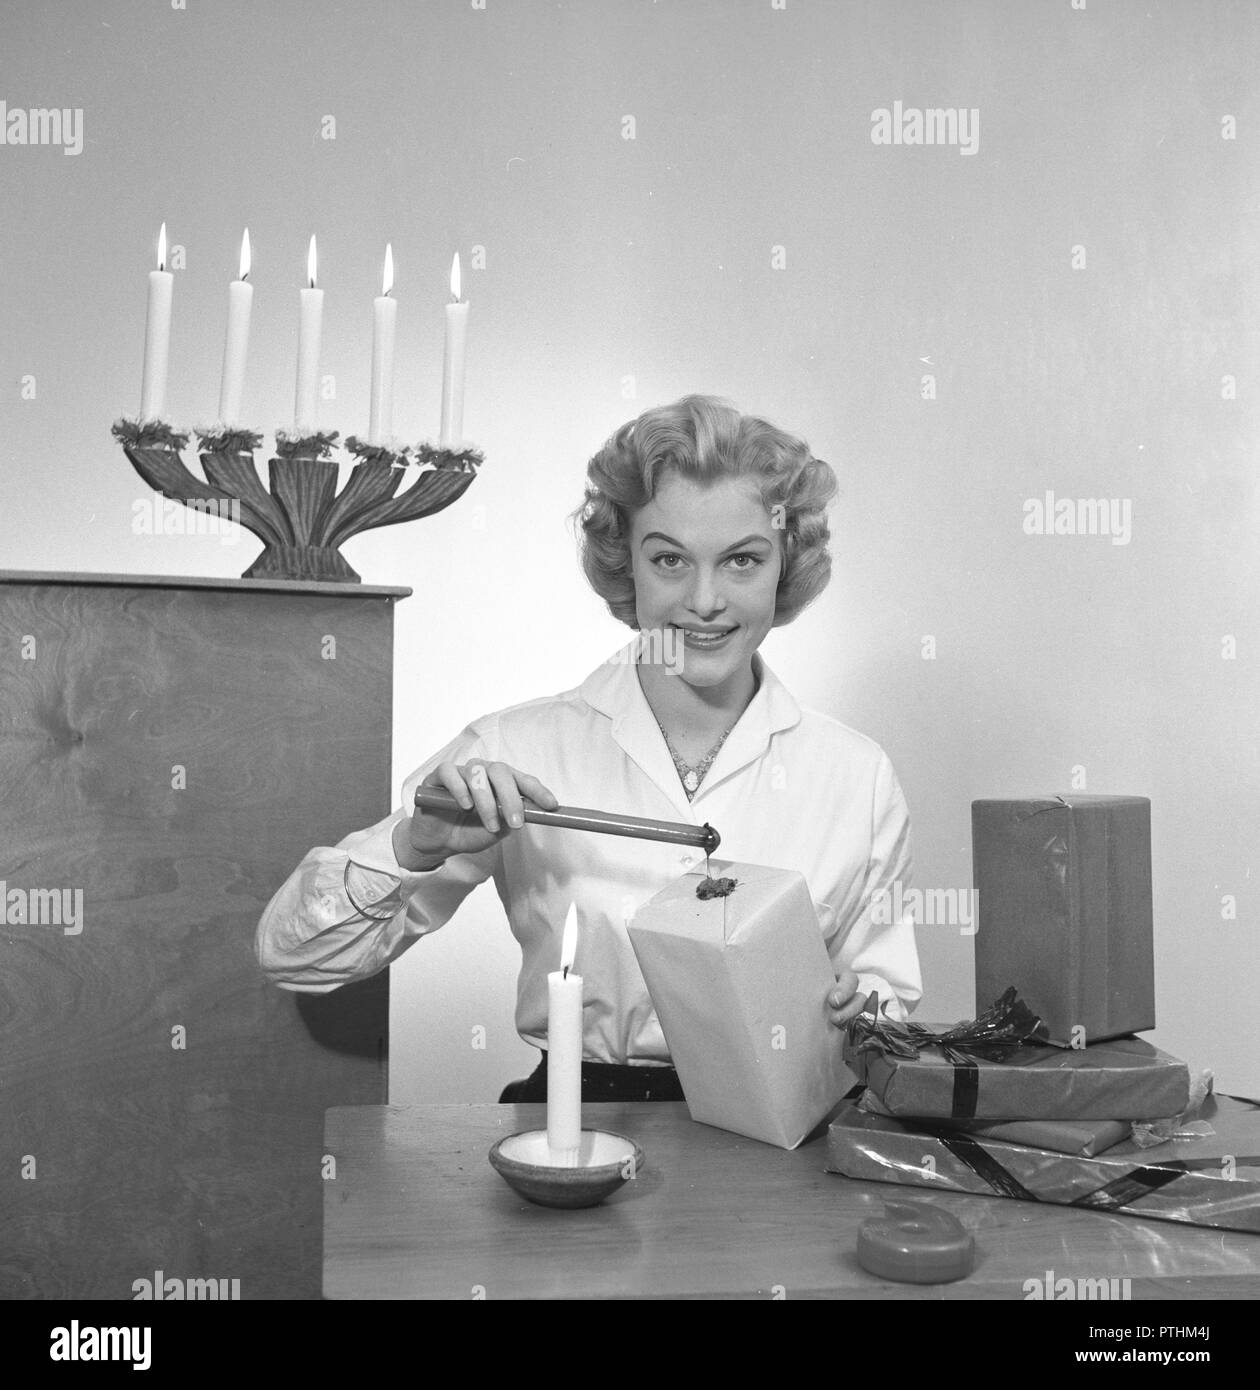 Christmas in the 1950s. Miss Margareta Ehrenfalk is the model for the christmas photo shoot. She is pictured when preparing her christmas presents. Sweden December 1954 Stock Photo